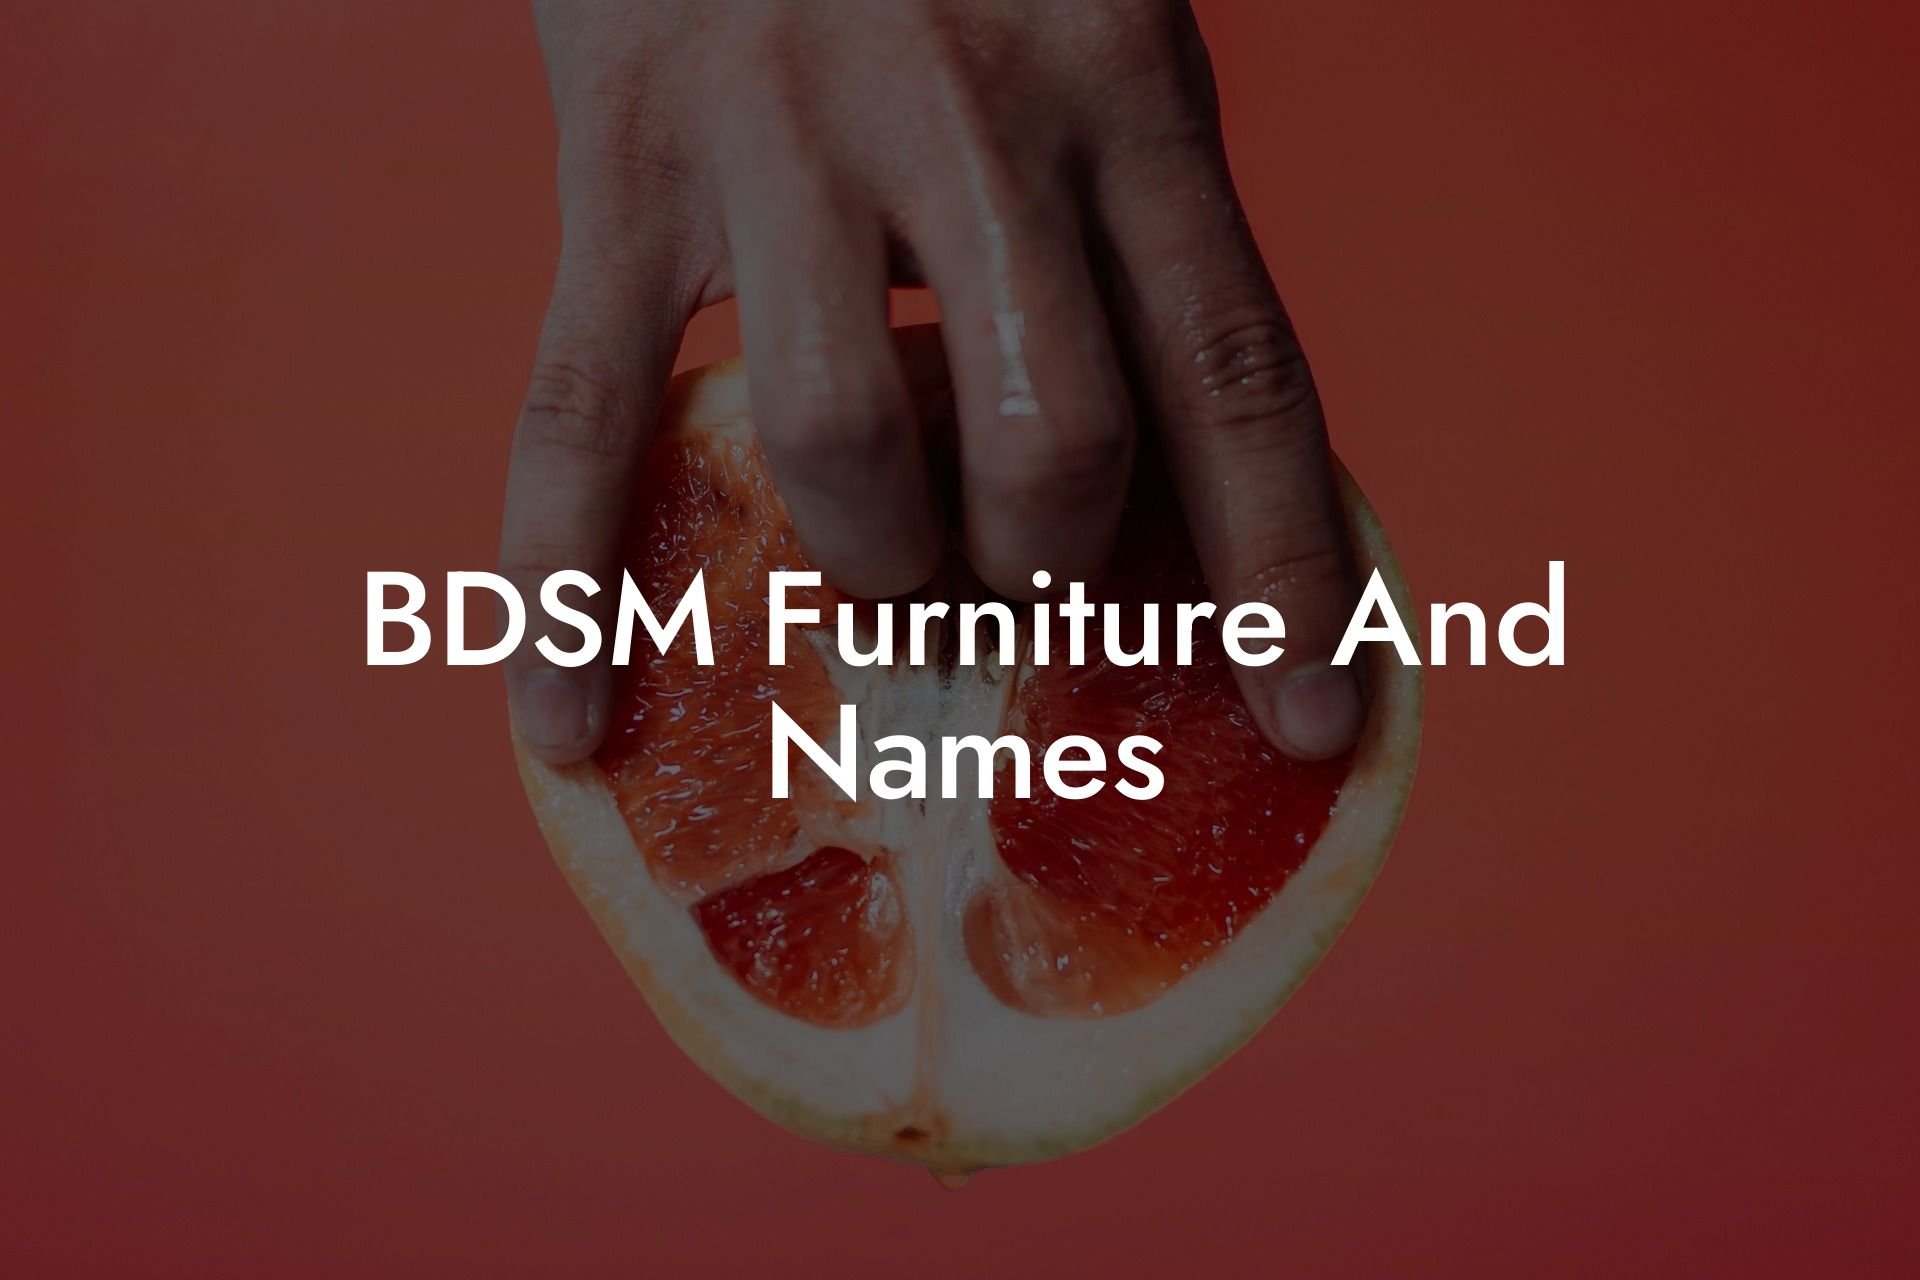 BDSM Furniture And Names